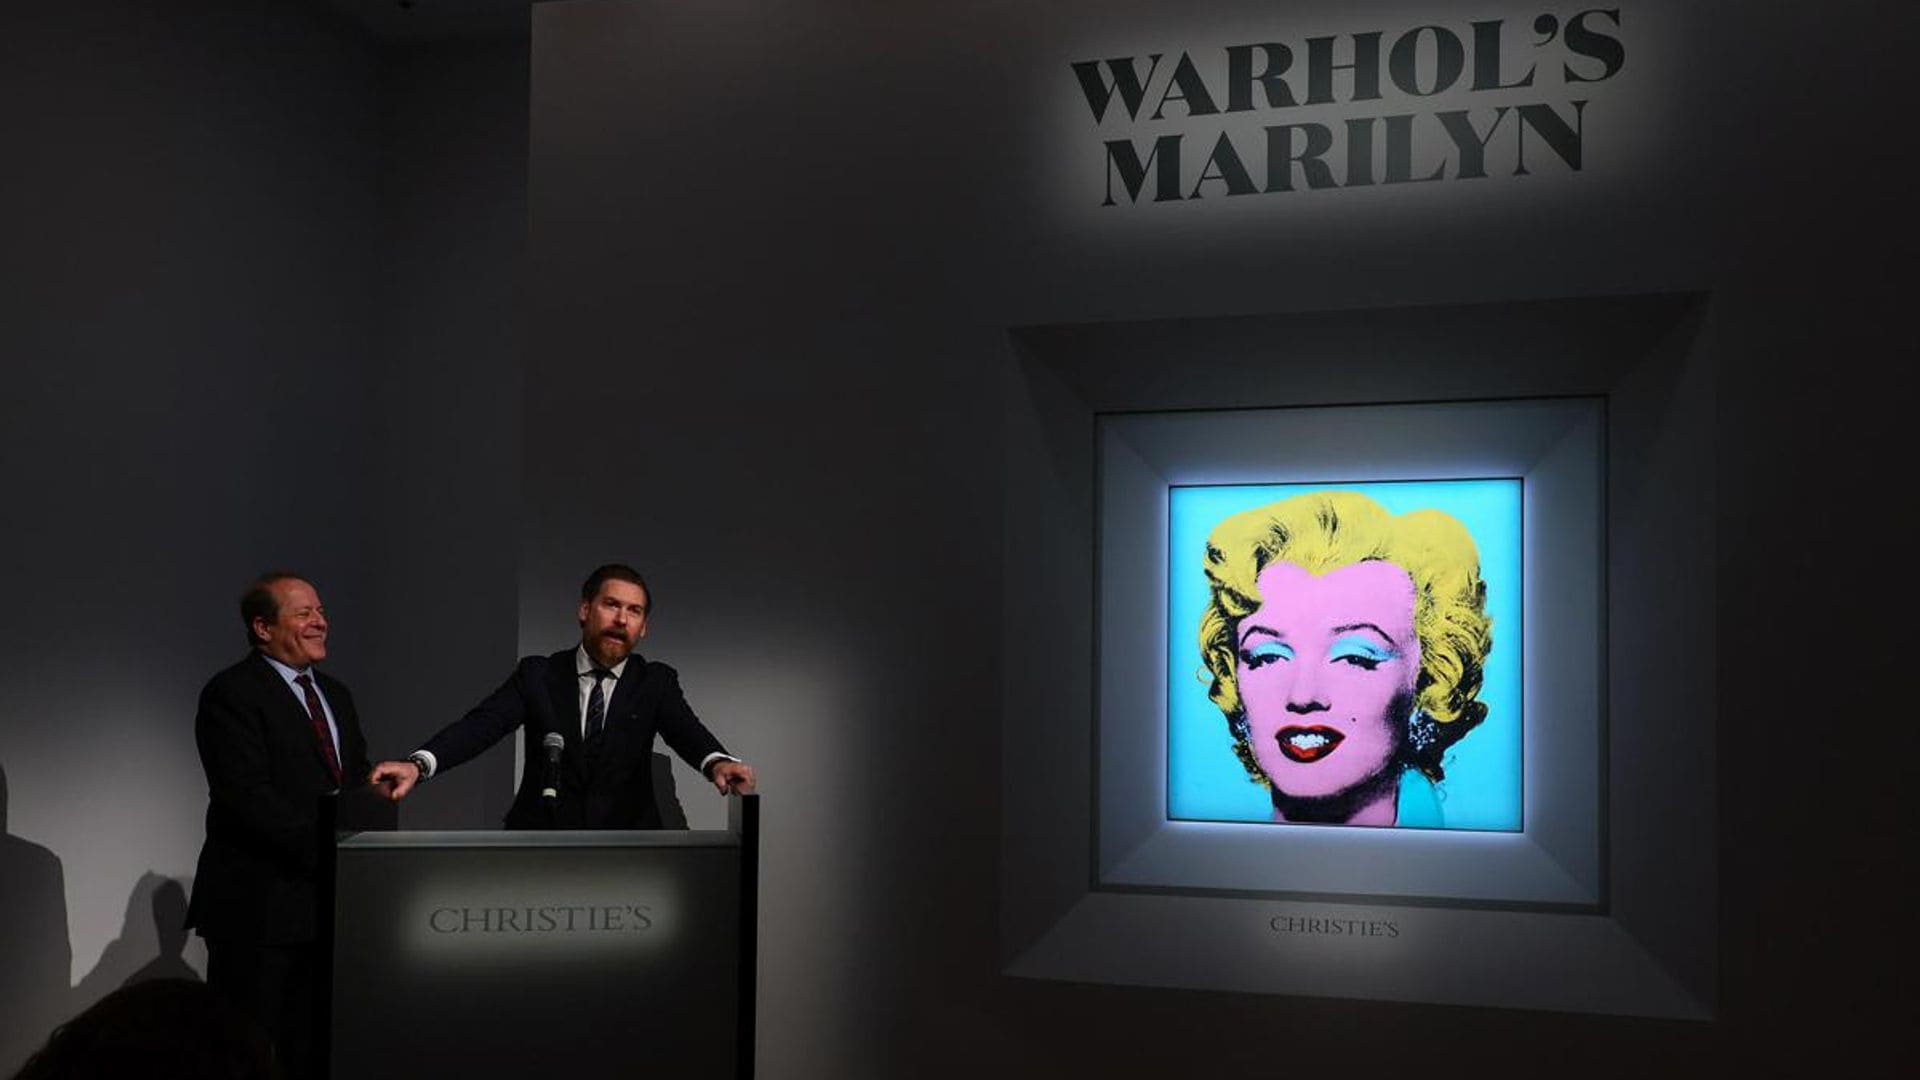 Andy Warhol’s Marilyn Monroe painting could sell for $200 million